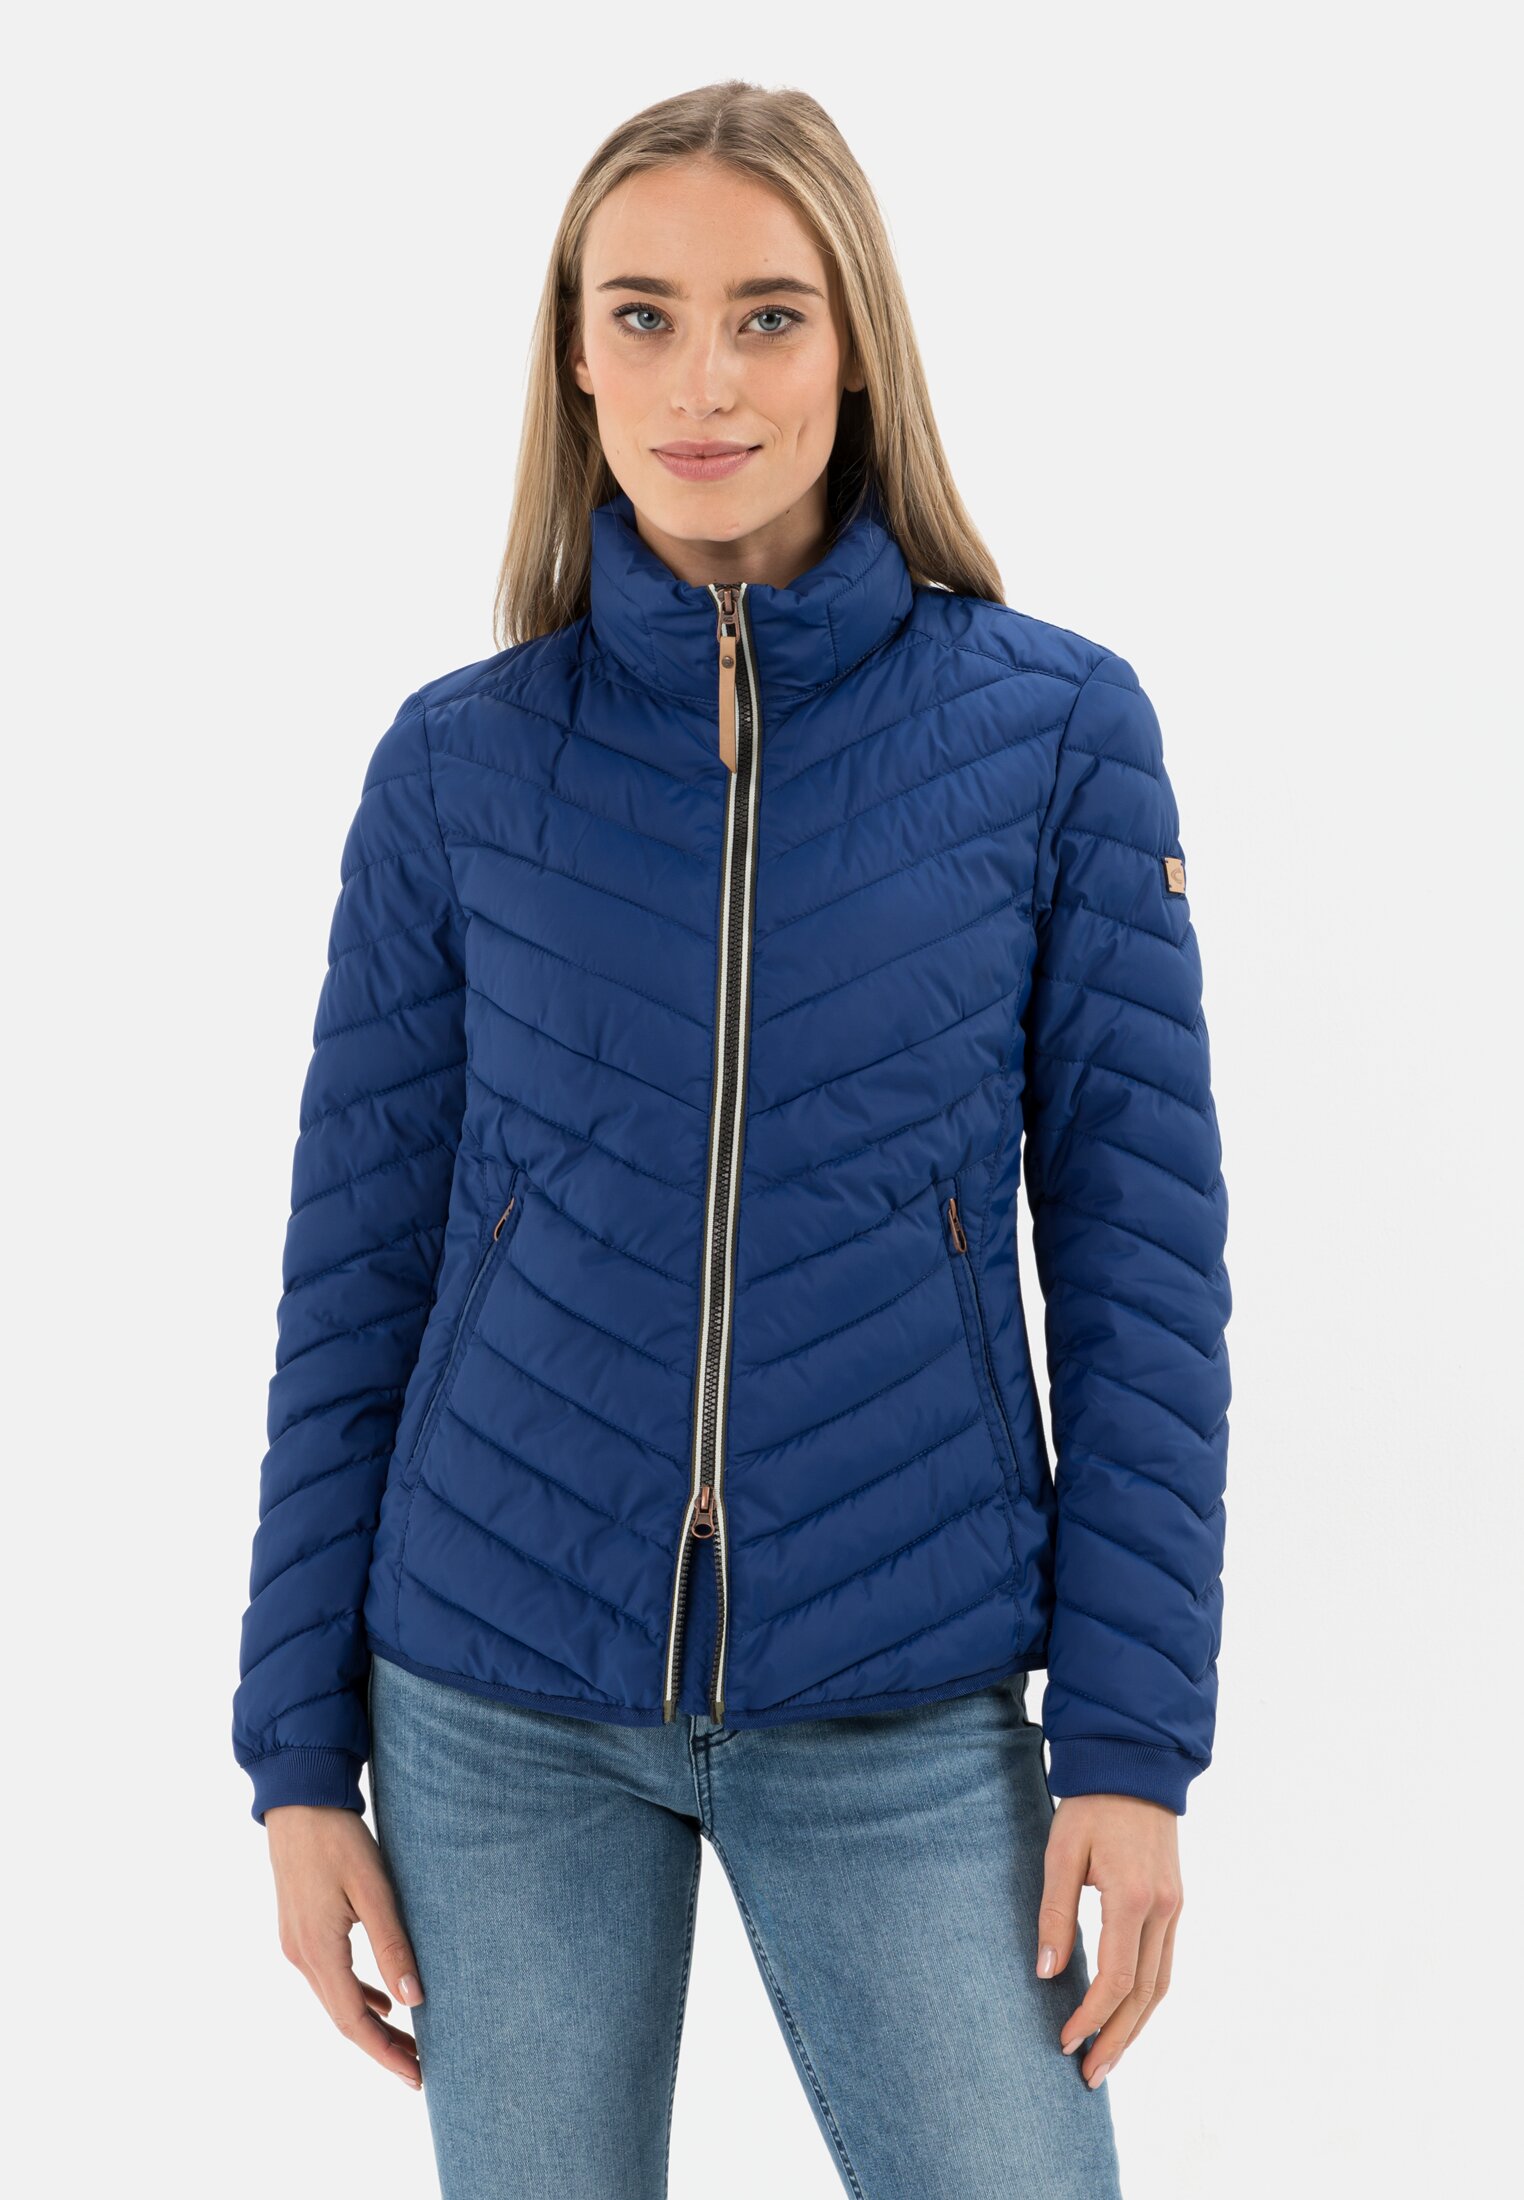 Camel Active Light weight quilted blouson